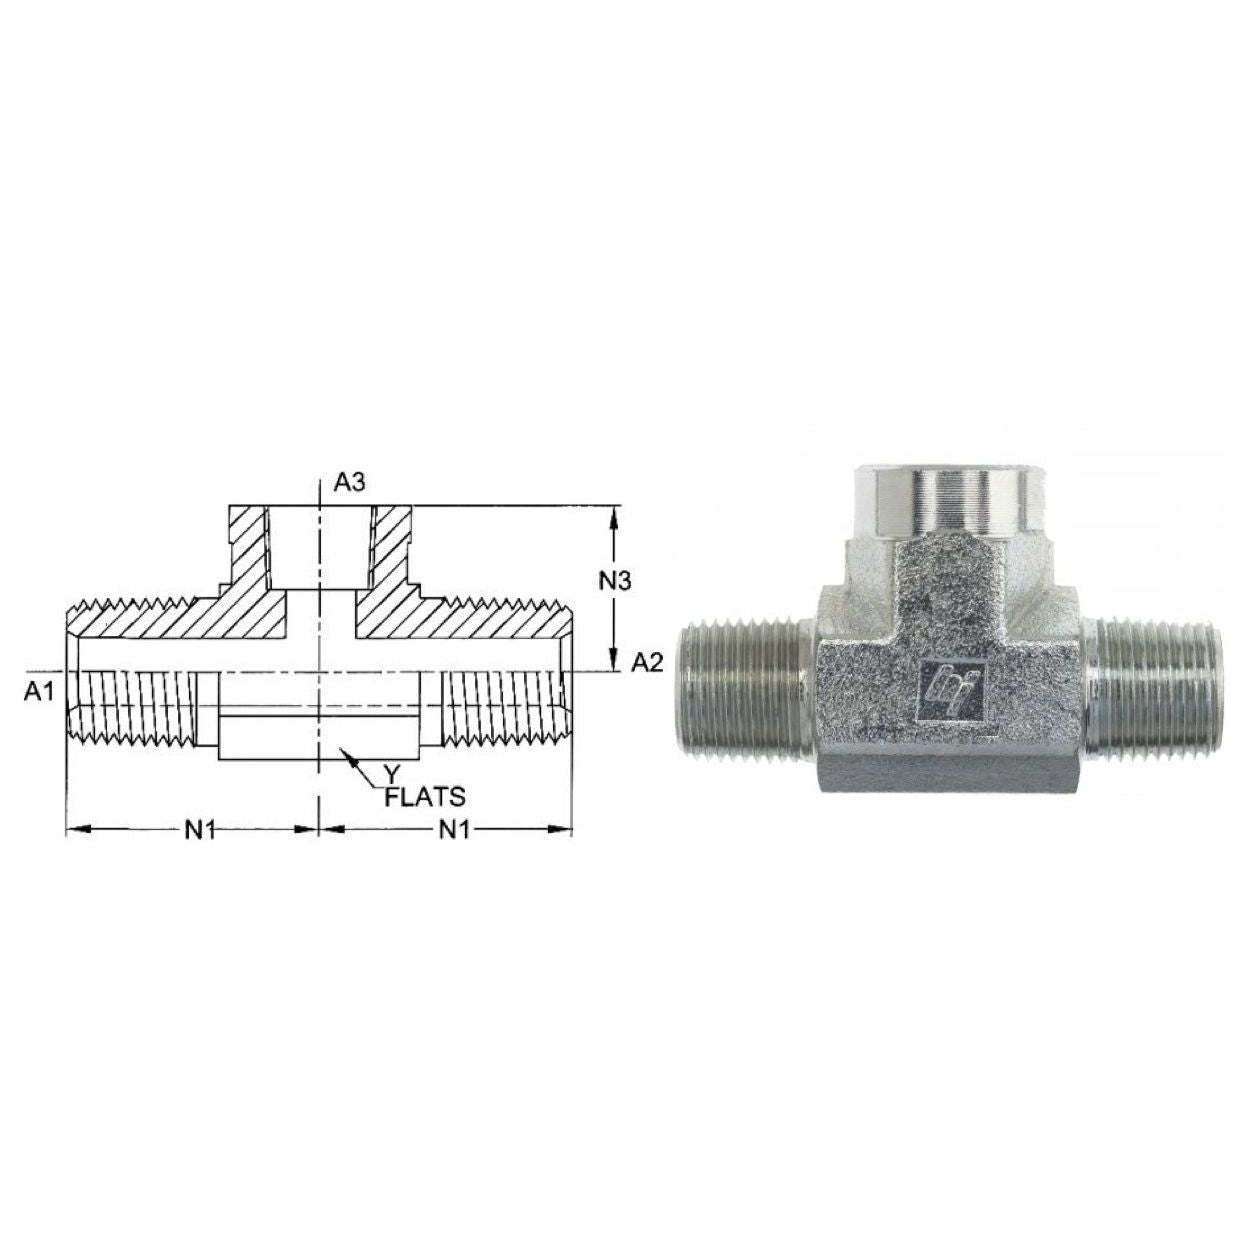 5601-06-06-06-SS : OneHydraulics Tee, 0.375 (3/8) Male NPT x 0.375 (3/8) Male NPT x 0.375 (3/8) Female NPT, Stainless Steel, 6000psi